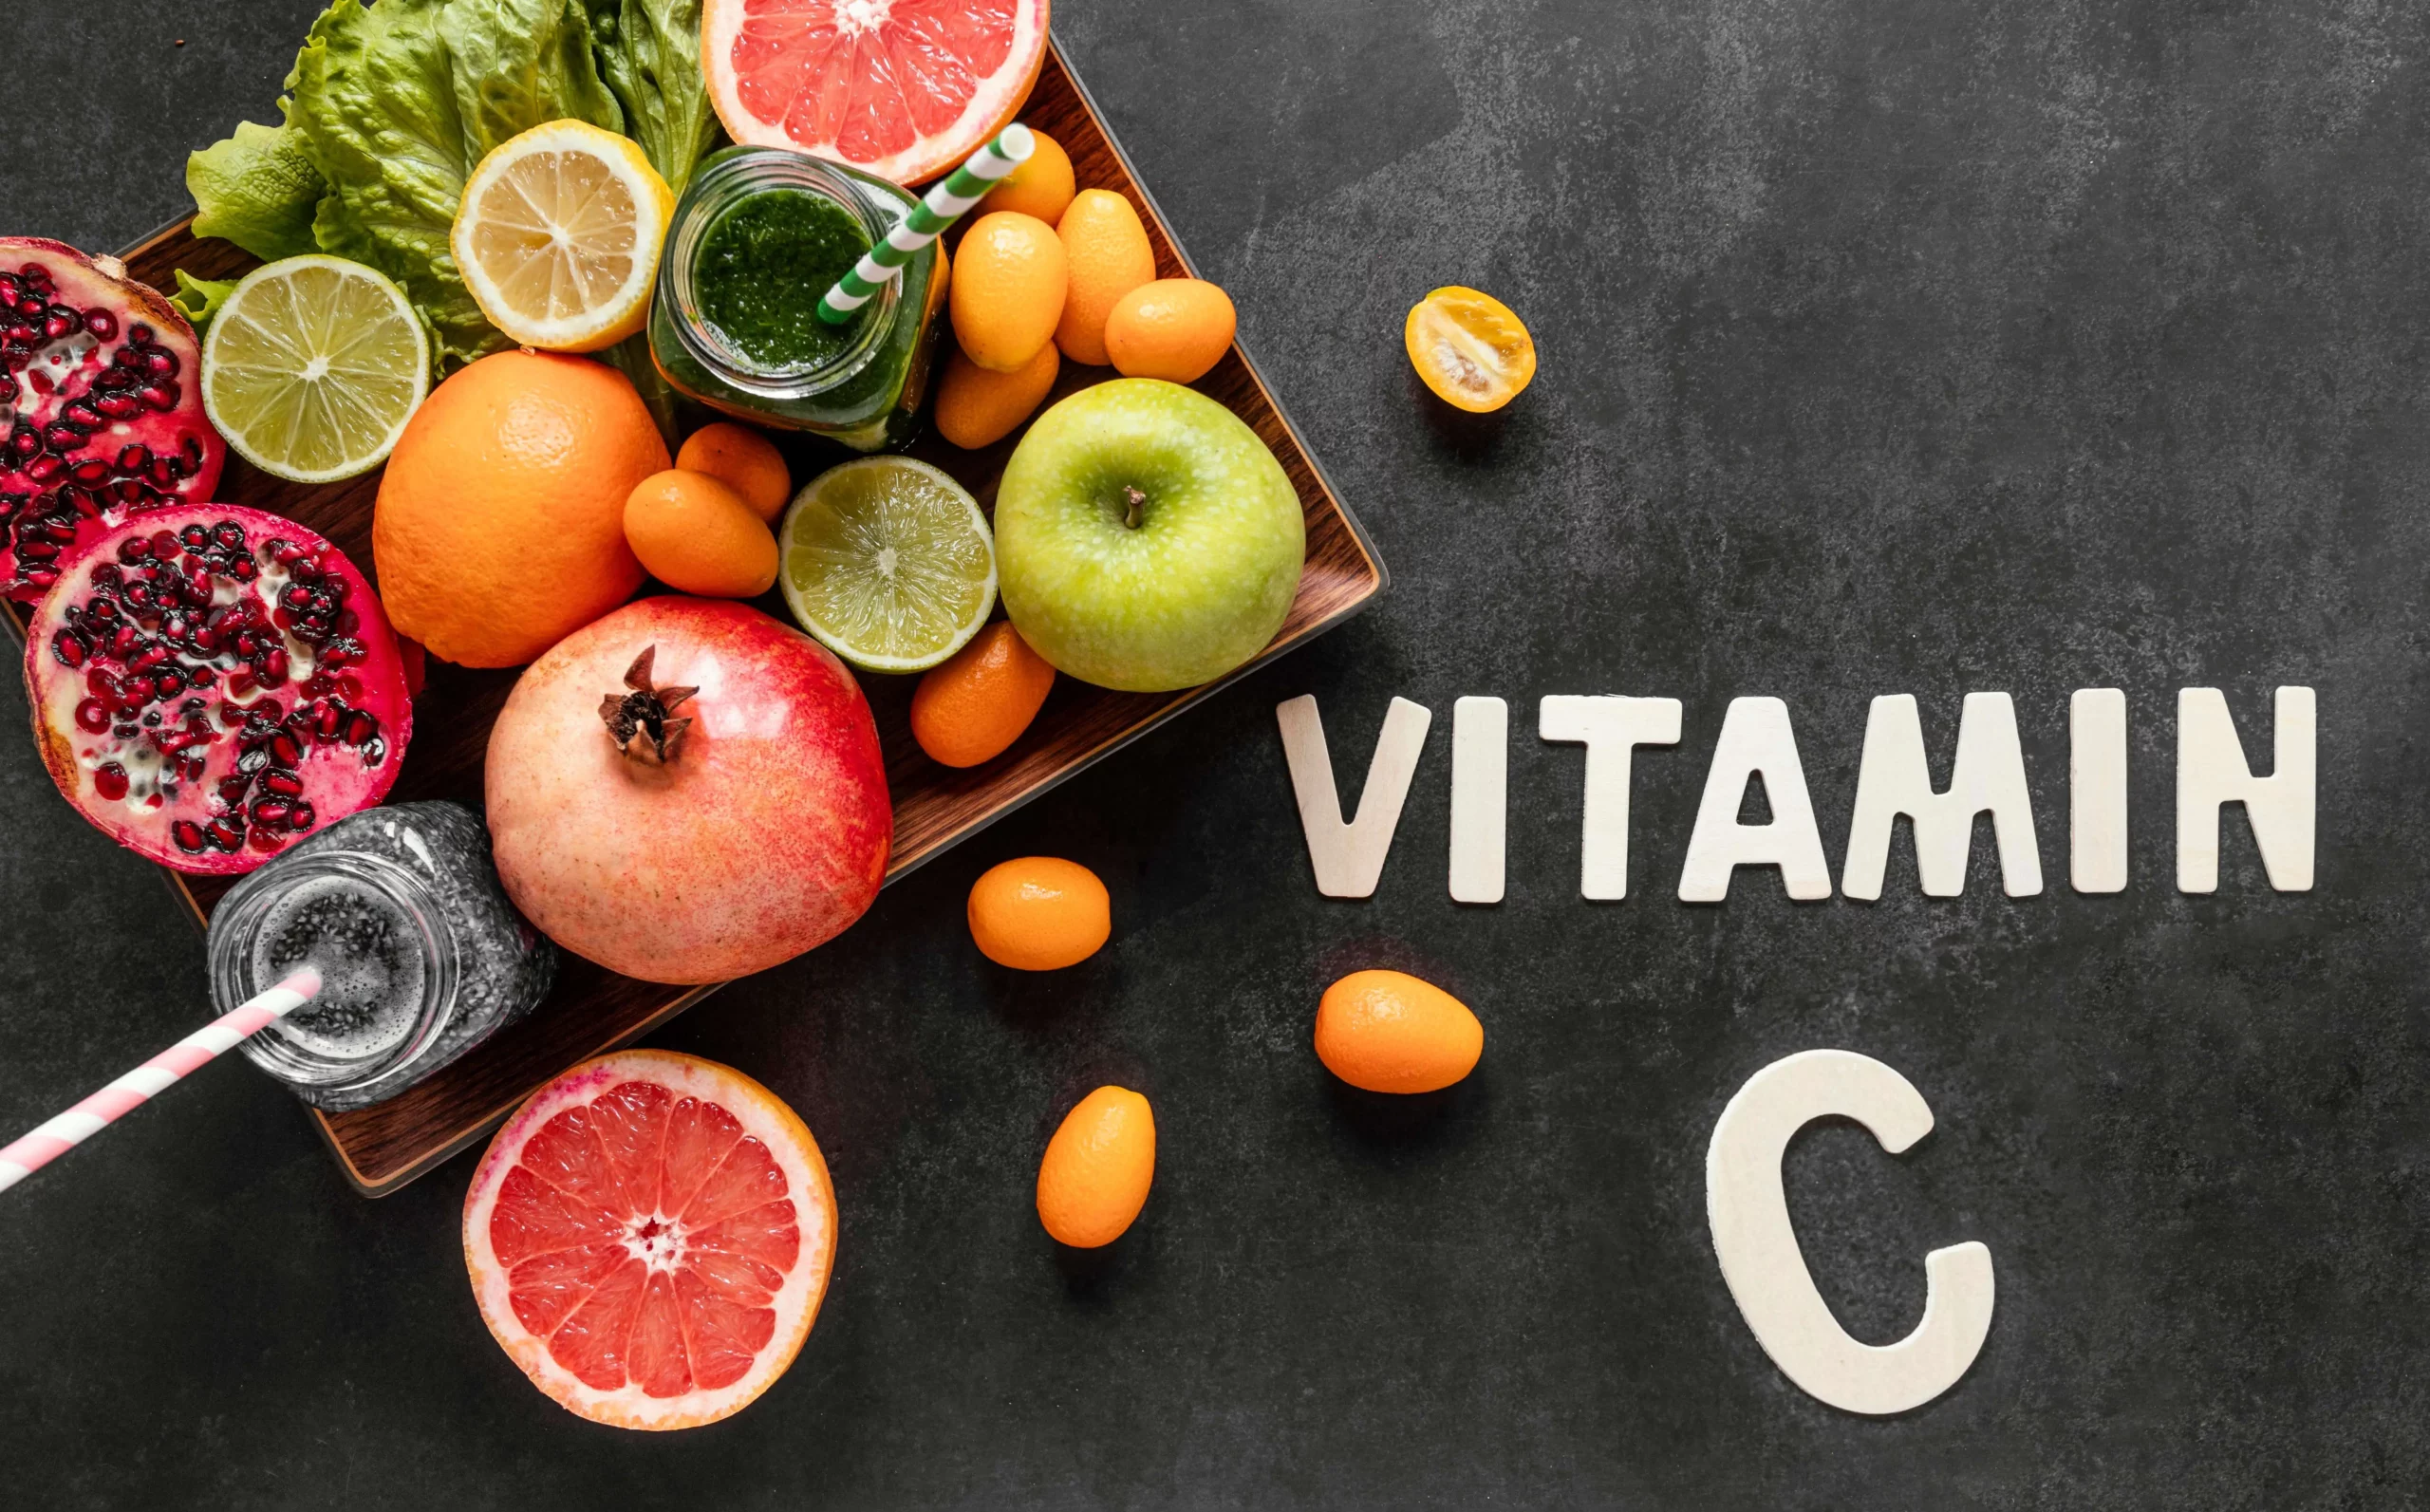 Read more about the article Vitamin C: the antioxidant that keeps you feeling young and healthy.